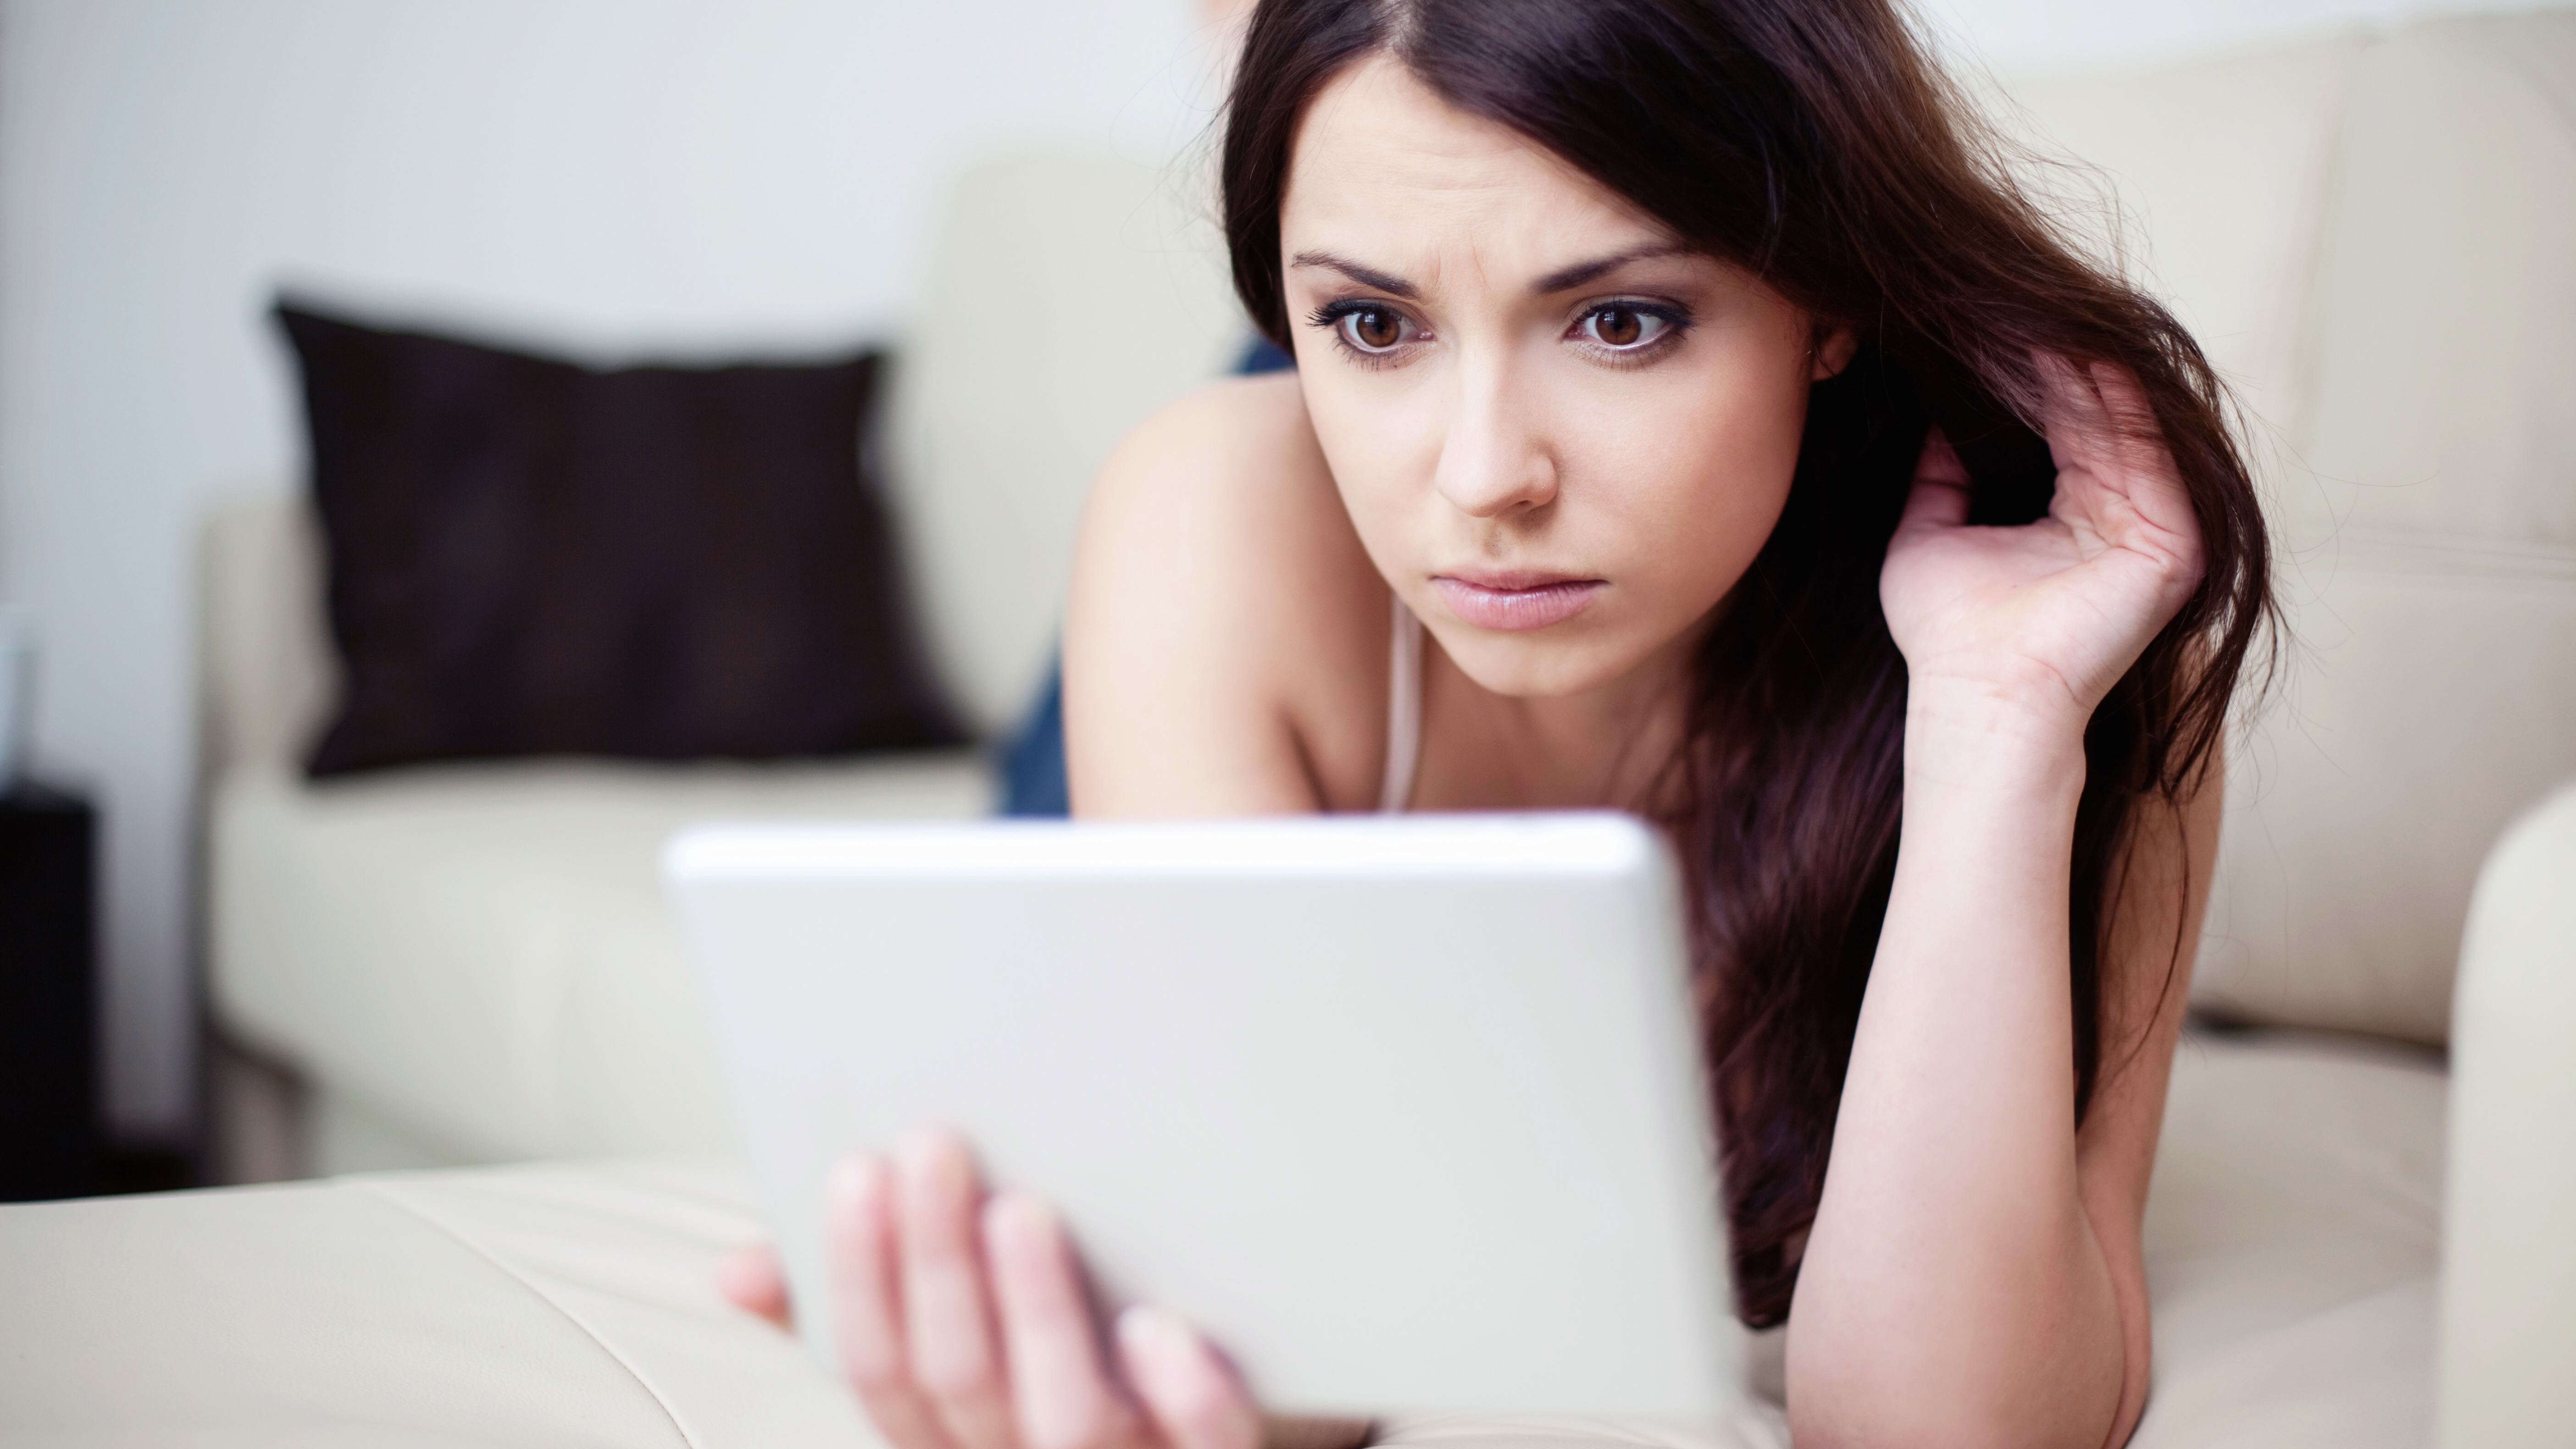 5616px x 3160px - Are We Failing Women in the Battle Against Porn? | Cru